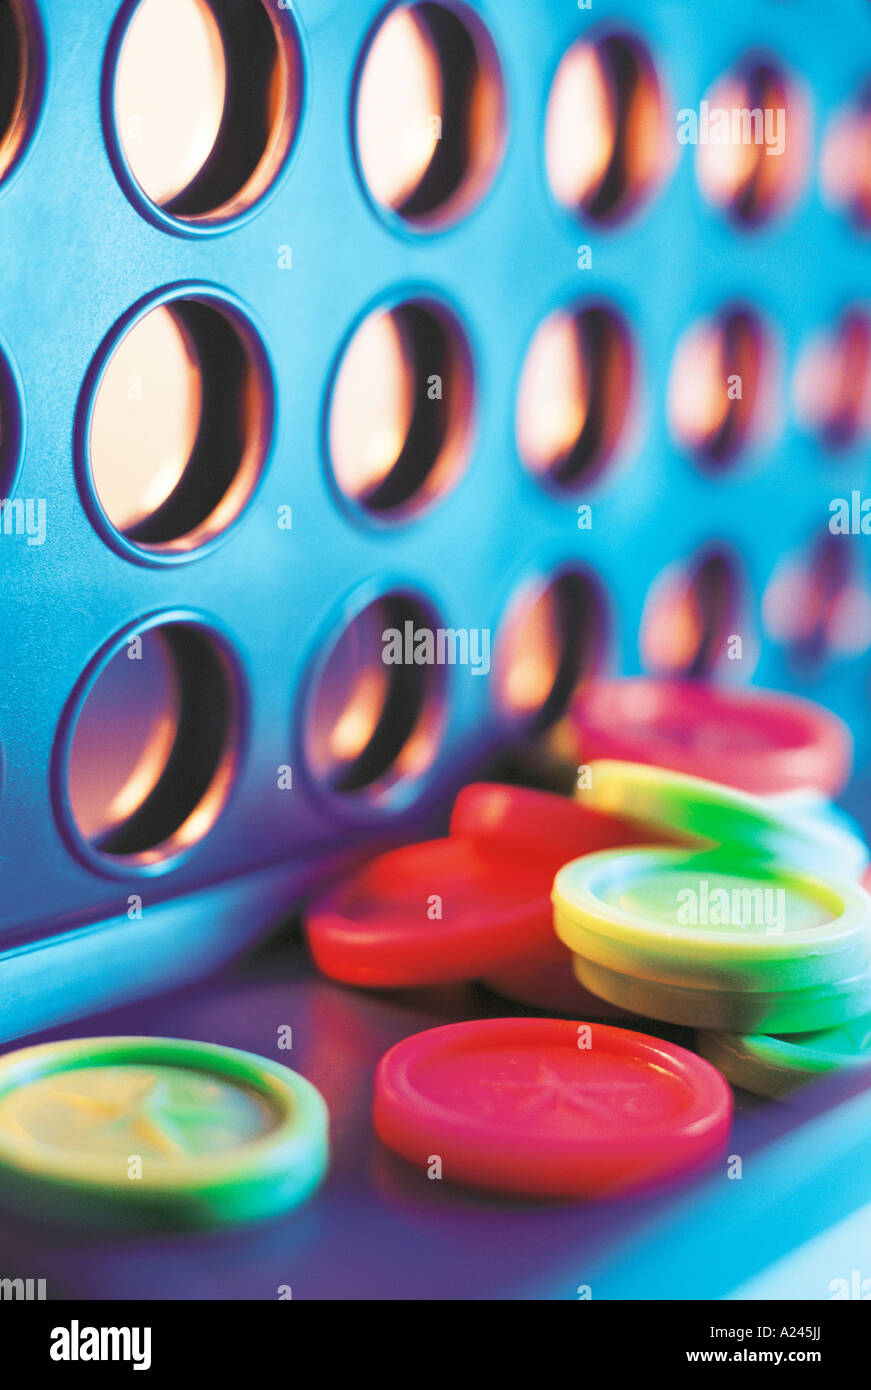 connect-four-game-stock-photo-alamy